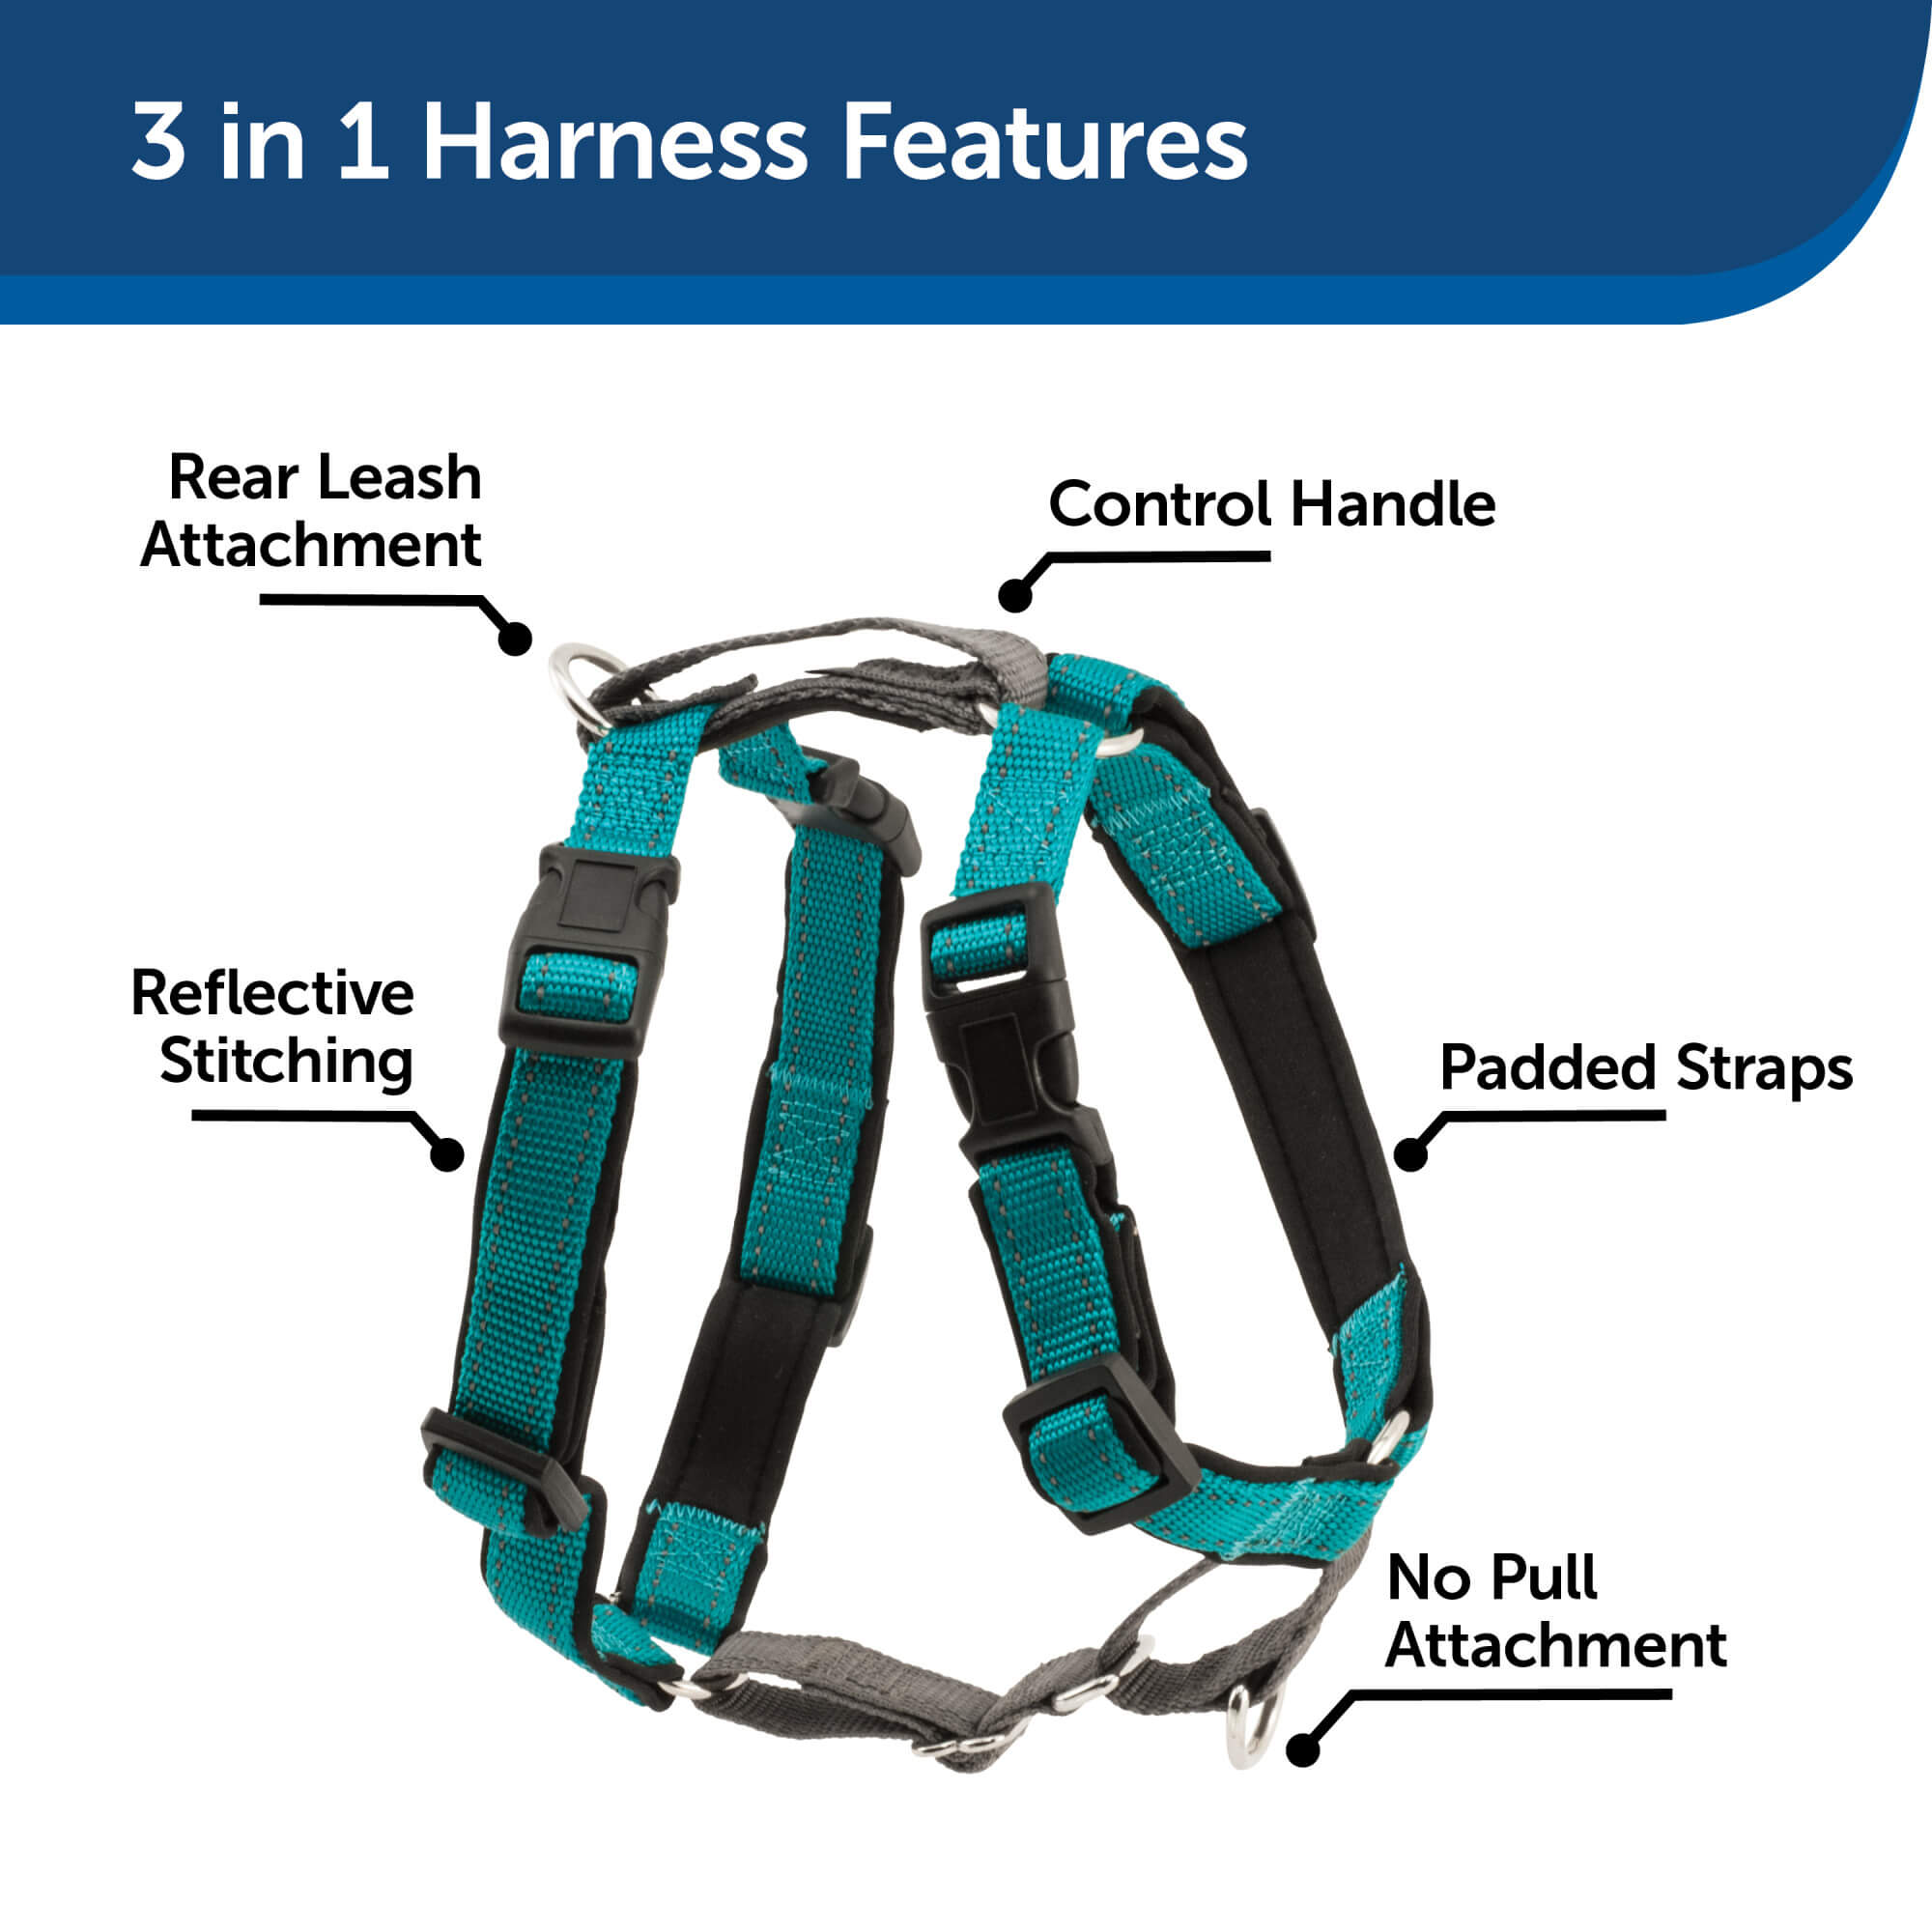 3 in 1 harness features